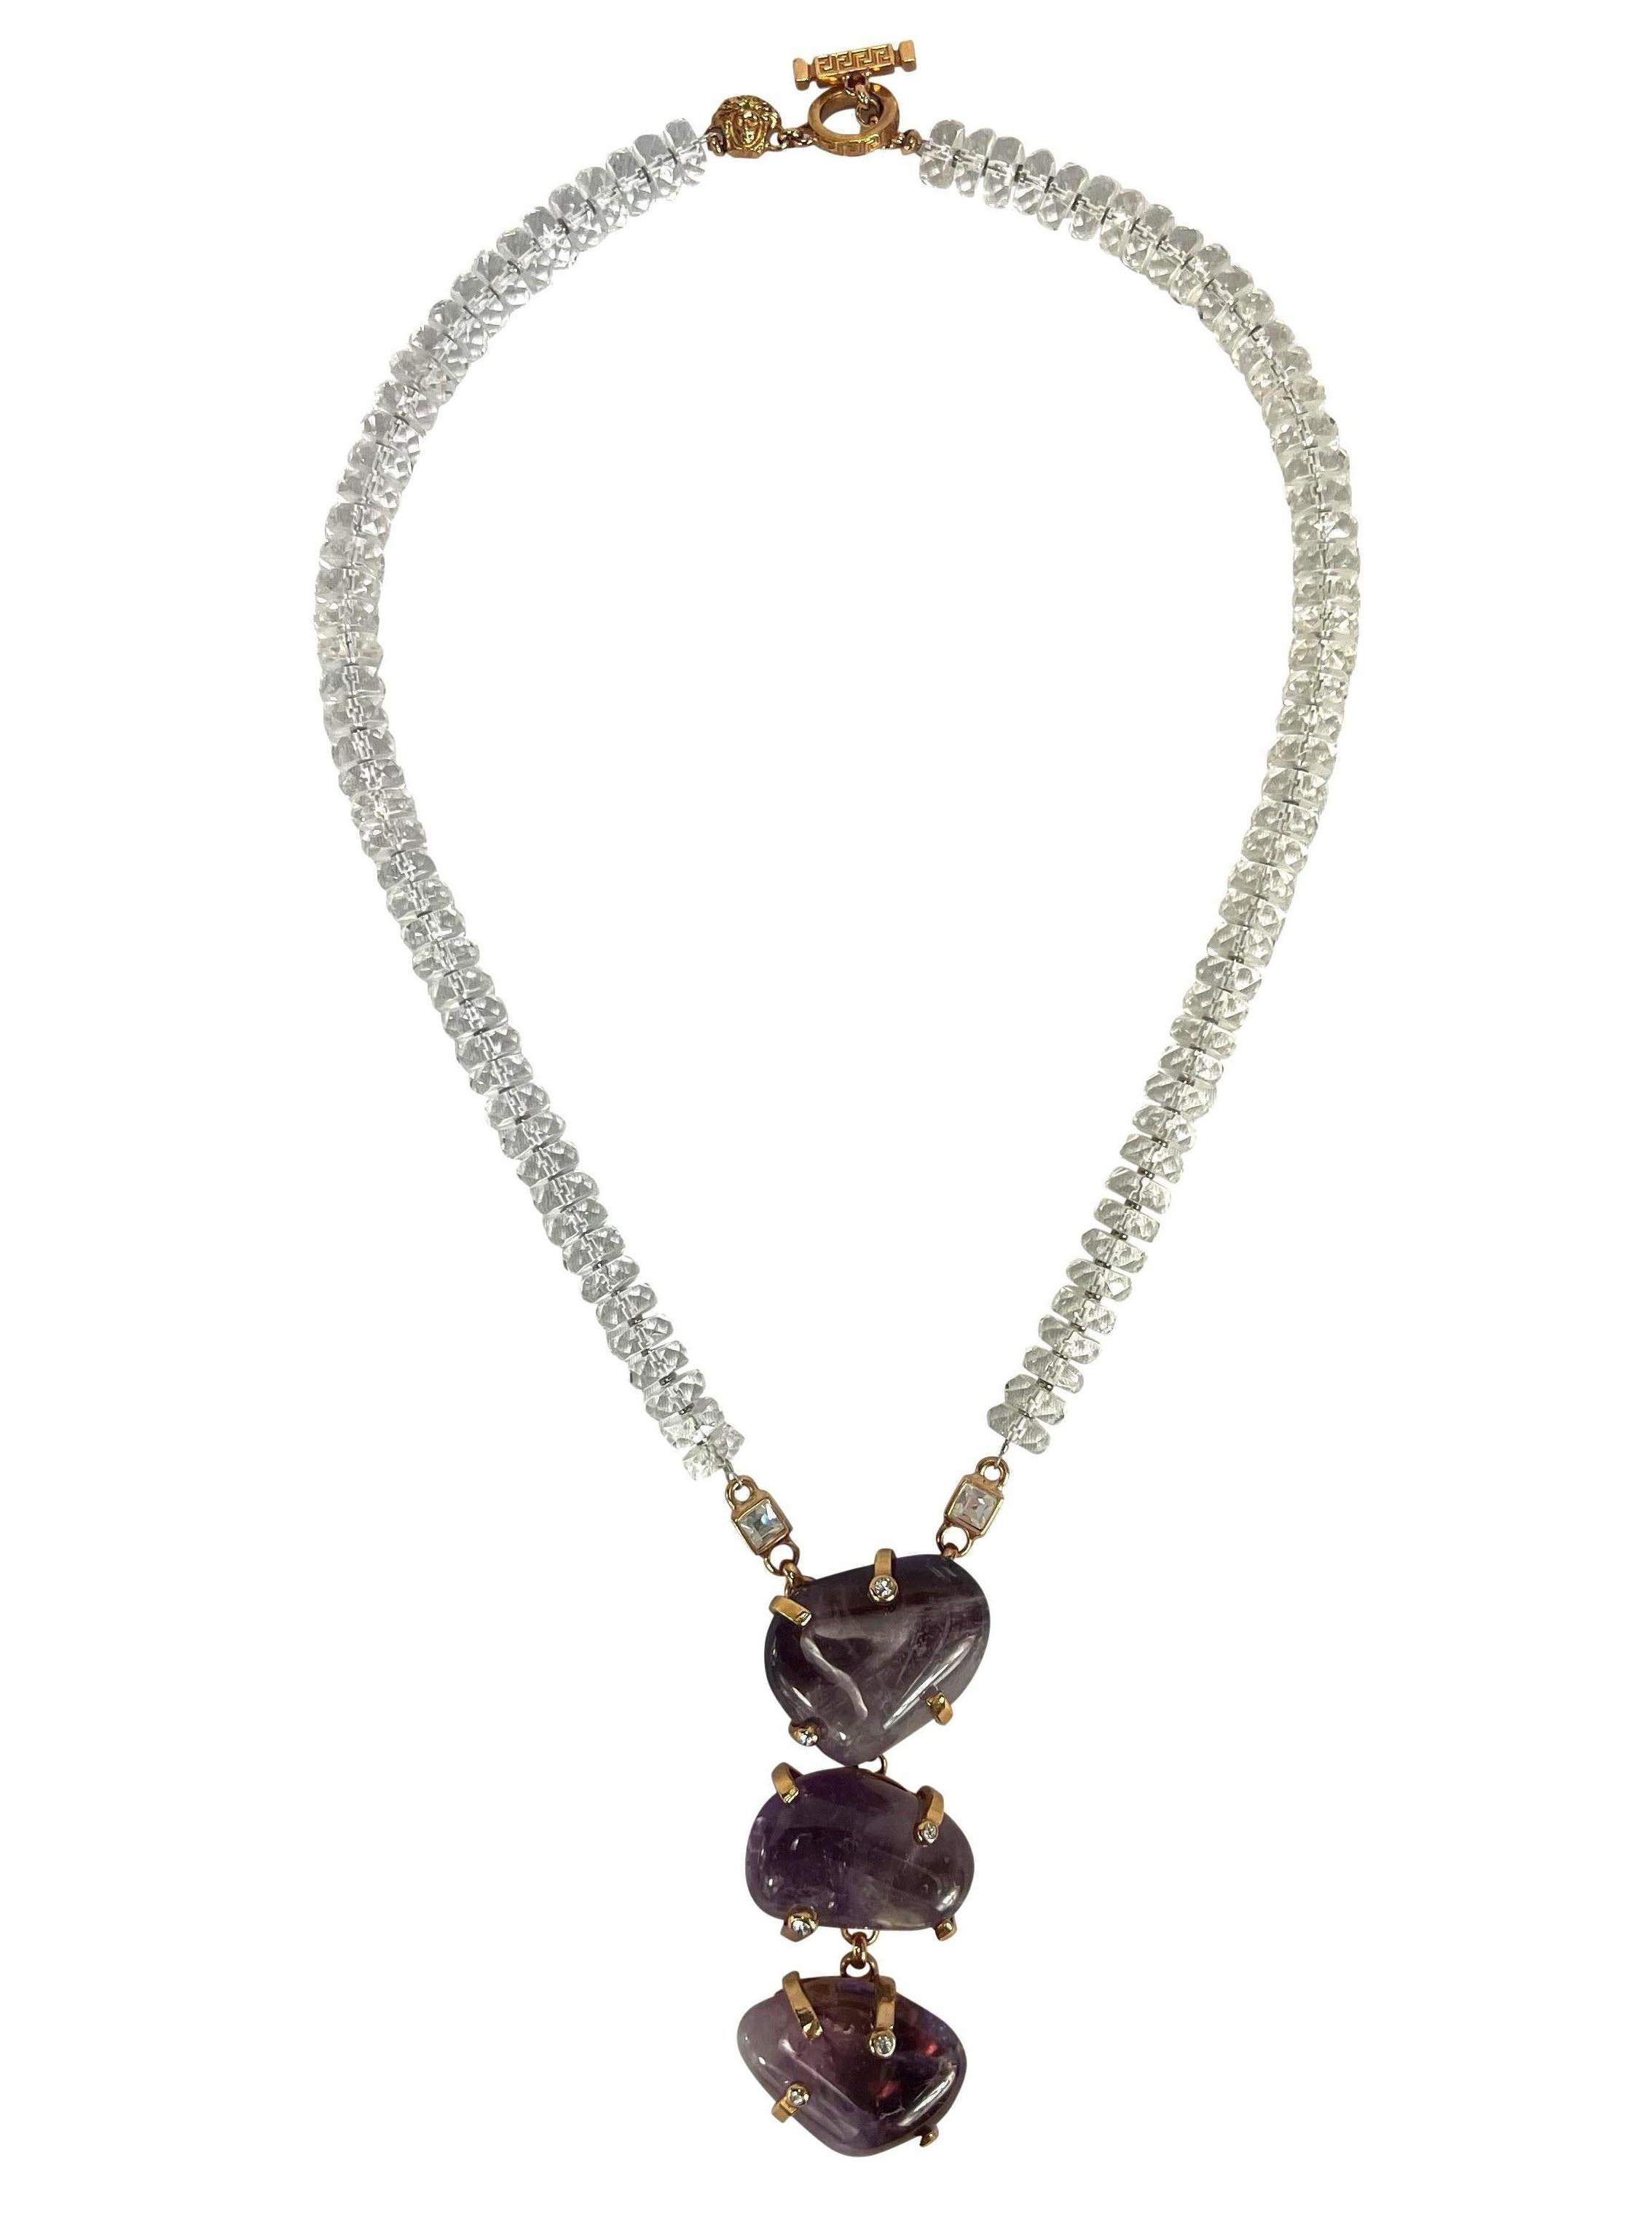 Women's or Men's F/W 2000 Atelier Versace Haute Couture Amethyst Crystal Rhinestone Drop Necklace For Sale